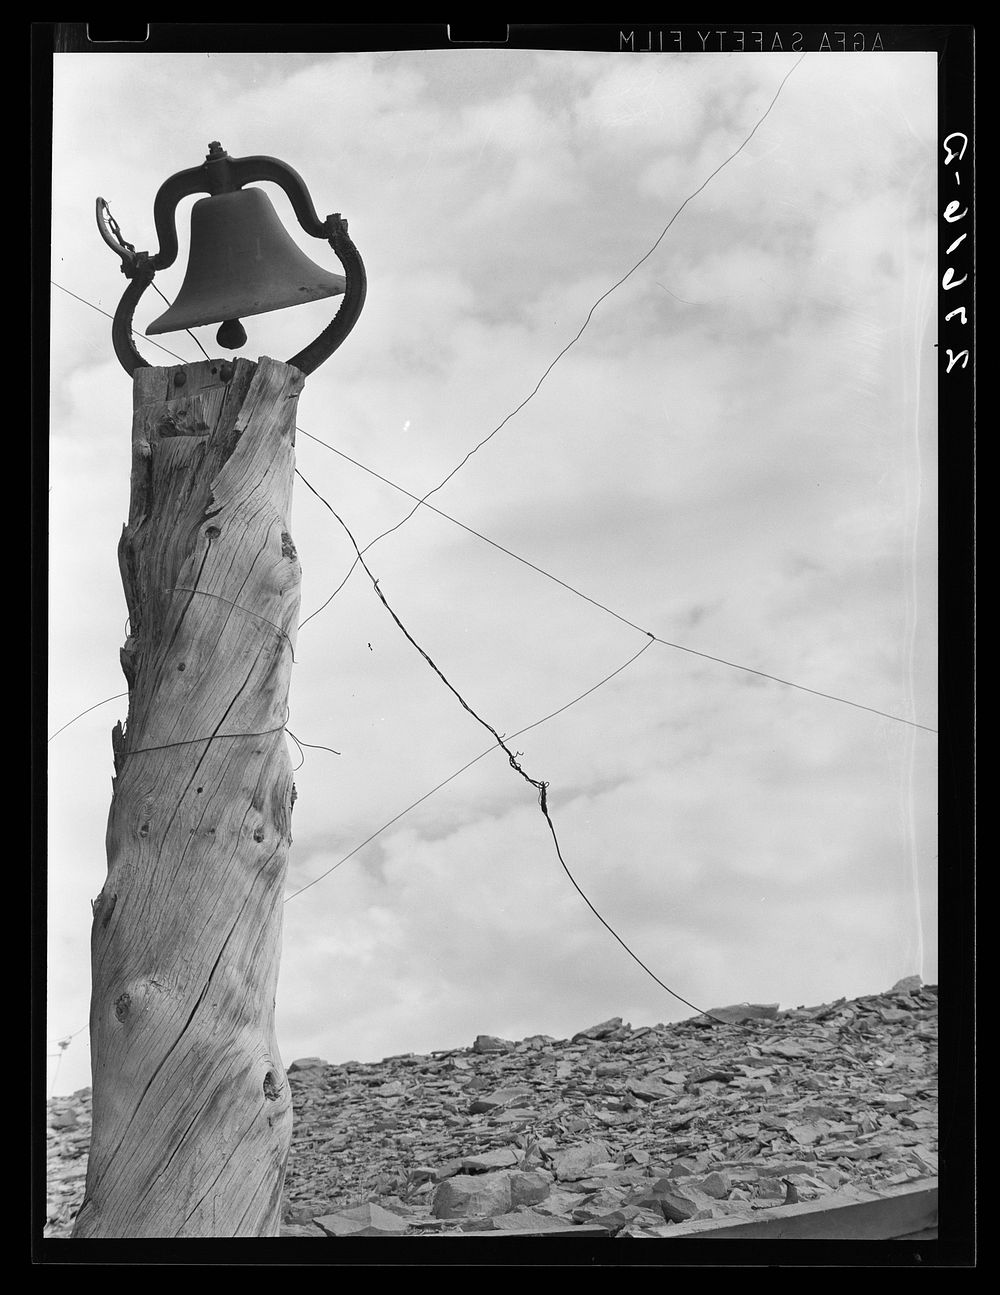 Dinner bell. Quarter Circle 'U' Ranch, Montana. Sourced from the Library of Congress.